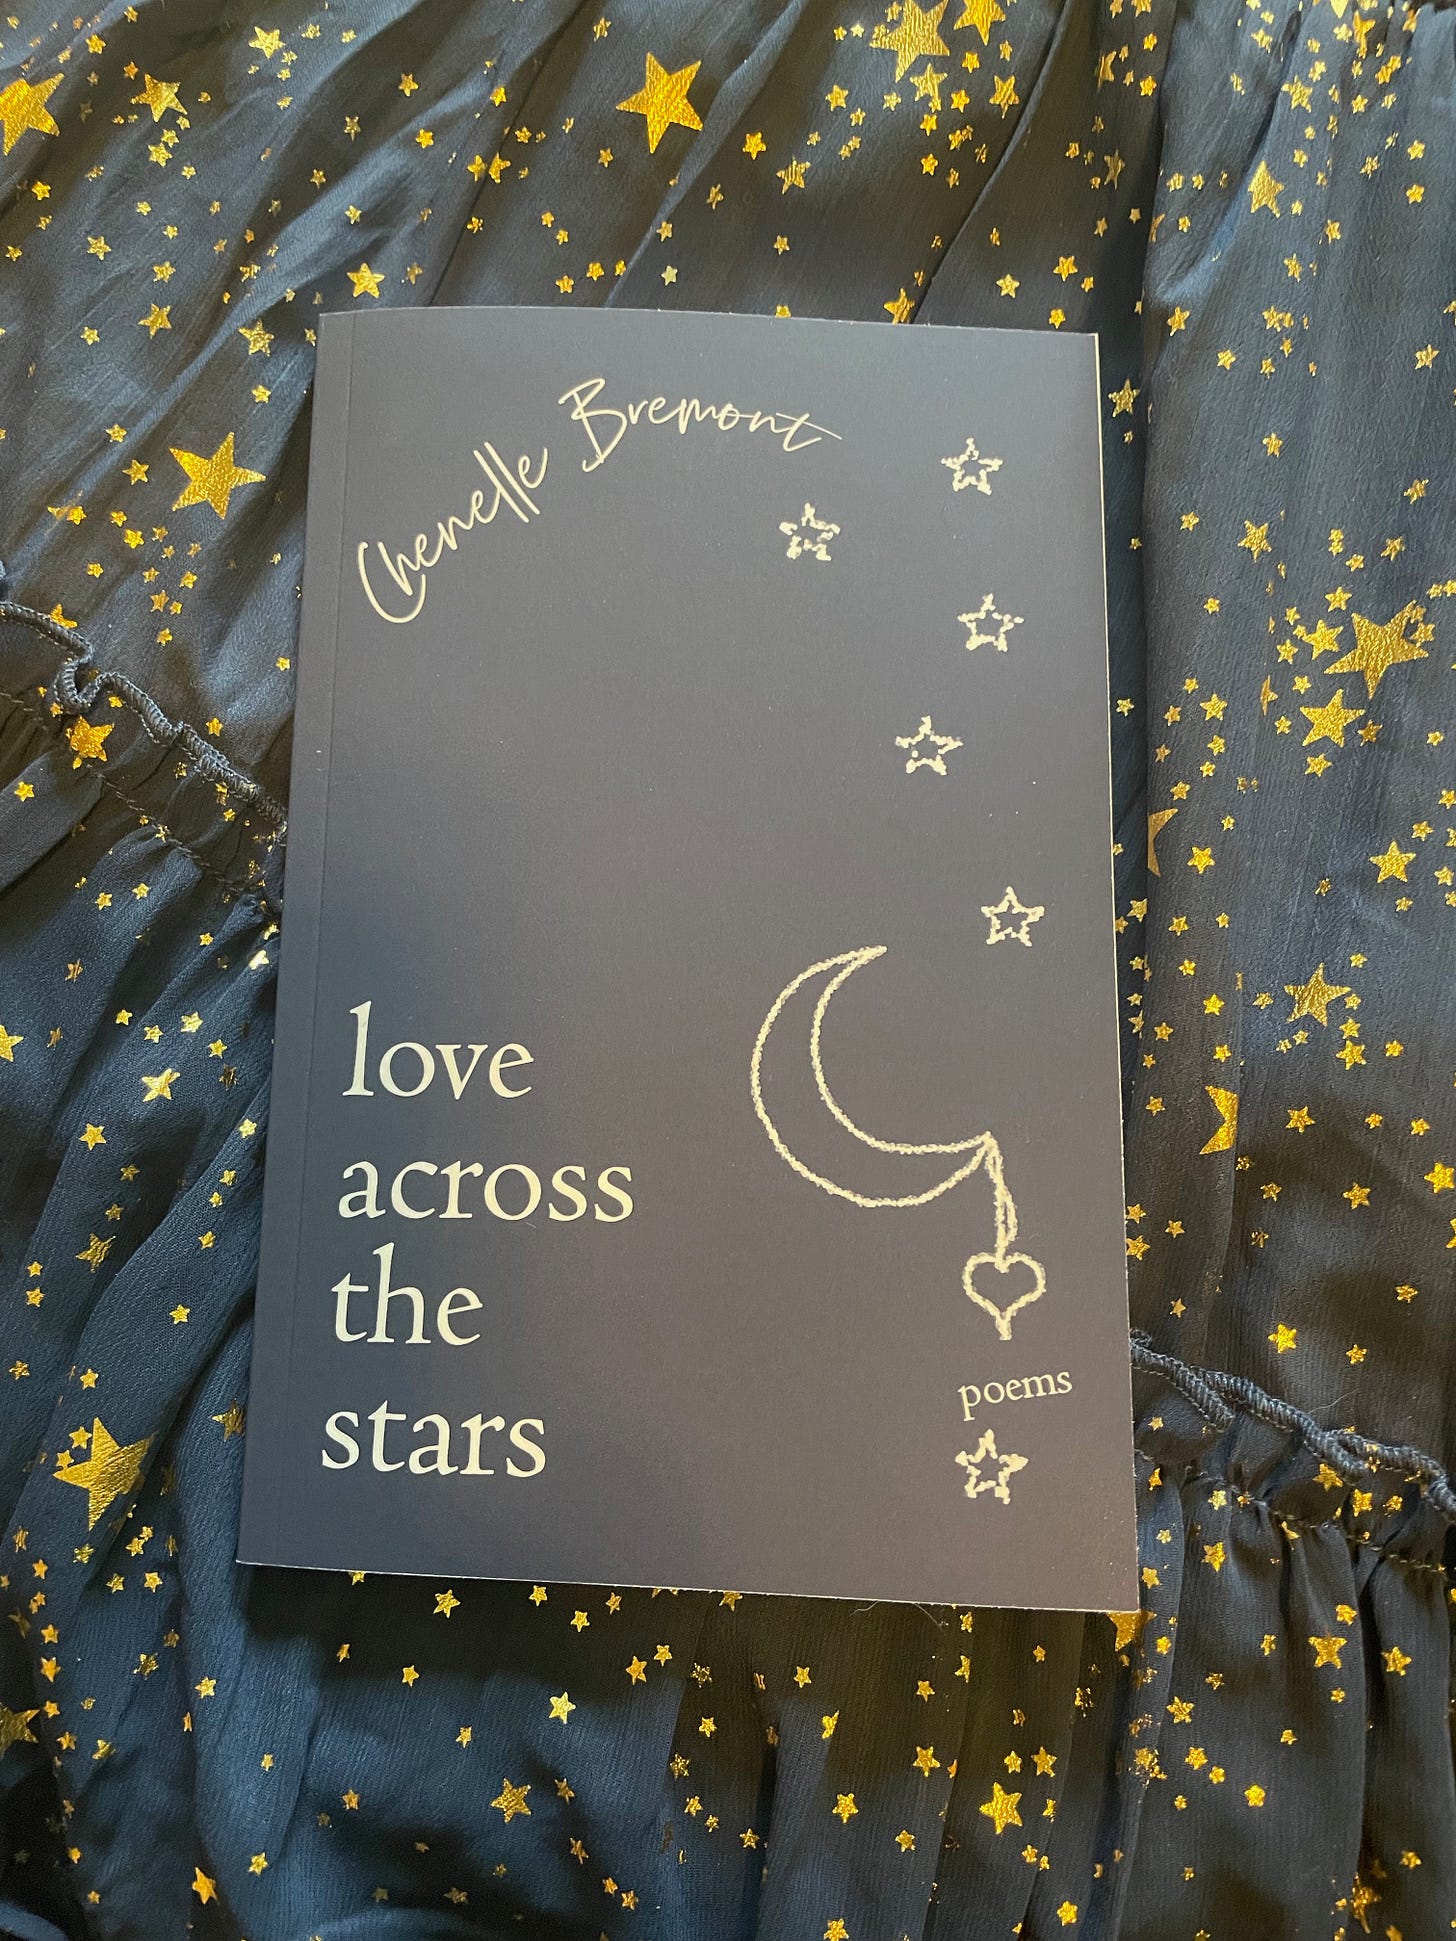 Chenelle's book, navy blue with chalk drawings of a crescent moon and stars, on crinkly blue fabric with gold stars.